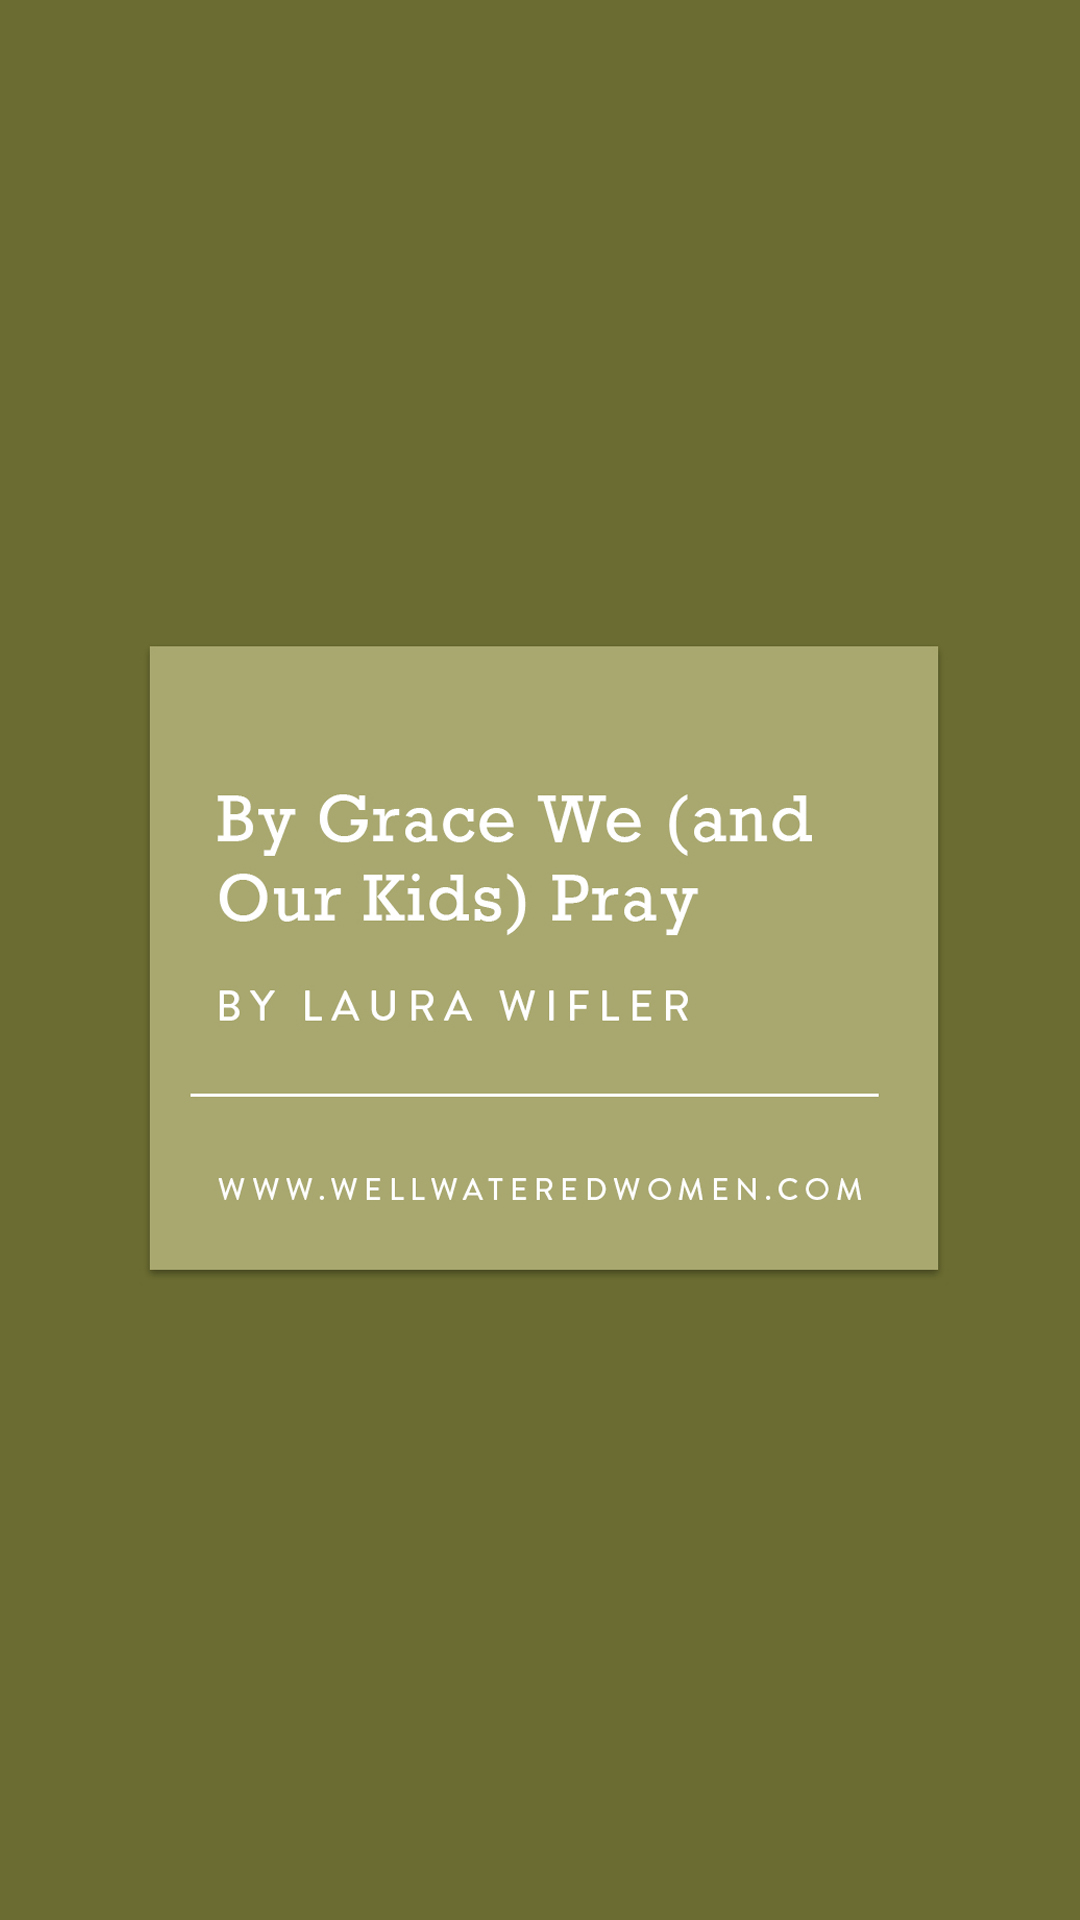 By Grace We Pray-Well-Watered Women Articles